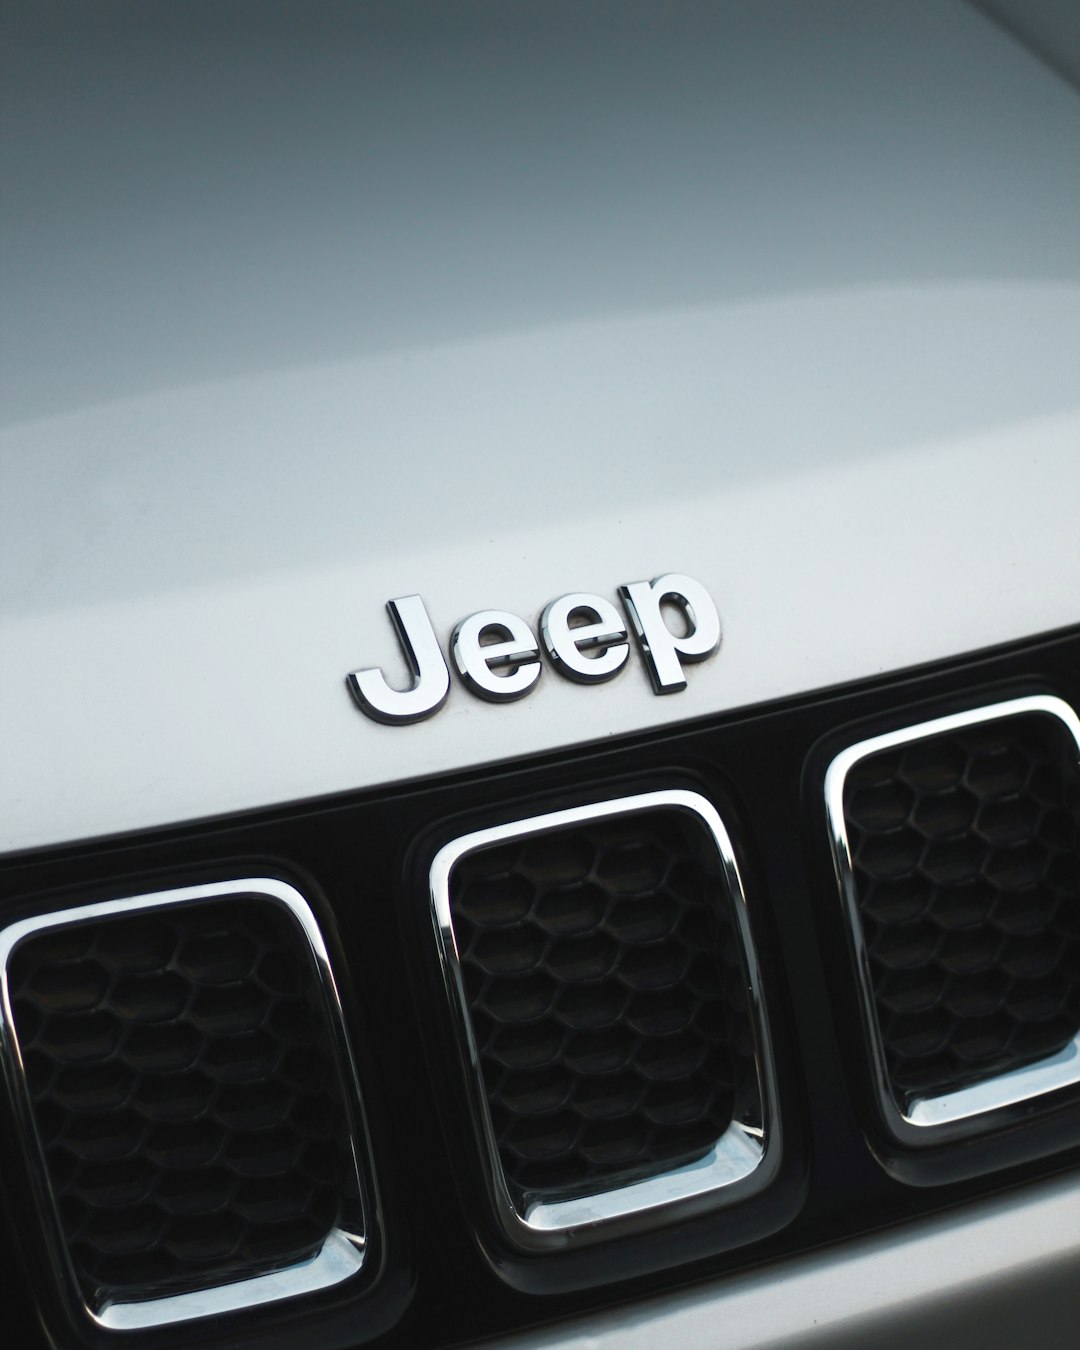 The Jeep Grand Cherokee L is a spacious and capable SUV with impressive off-road capabilities.